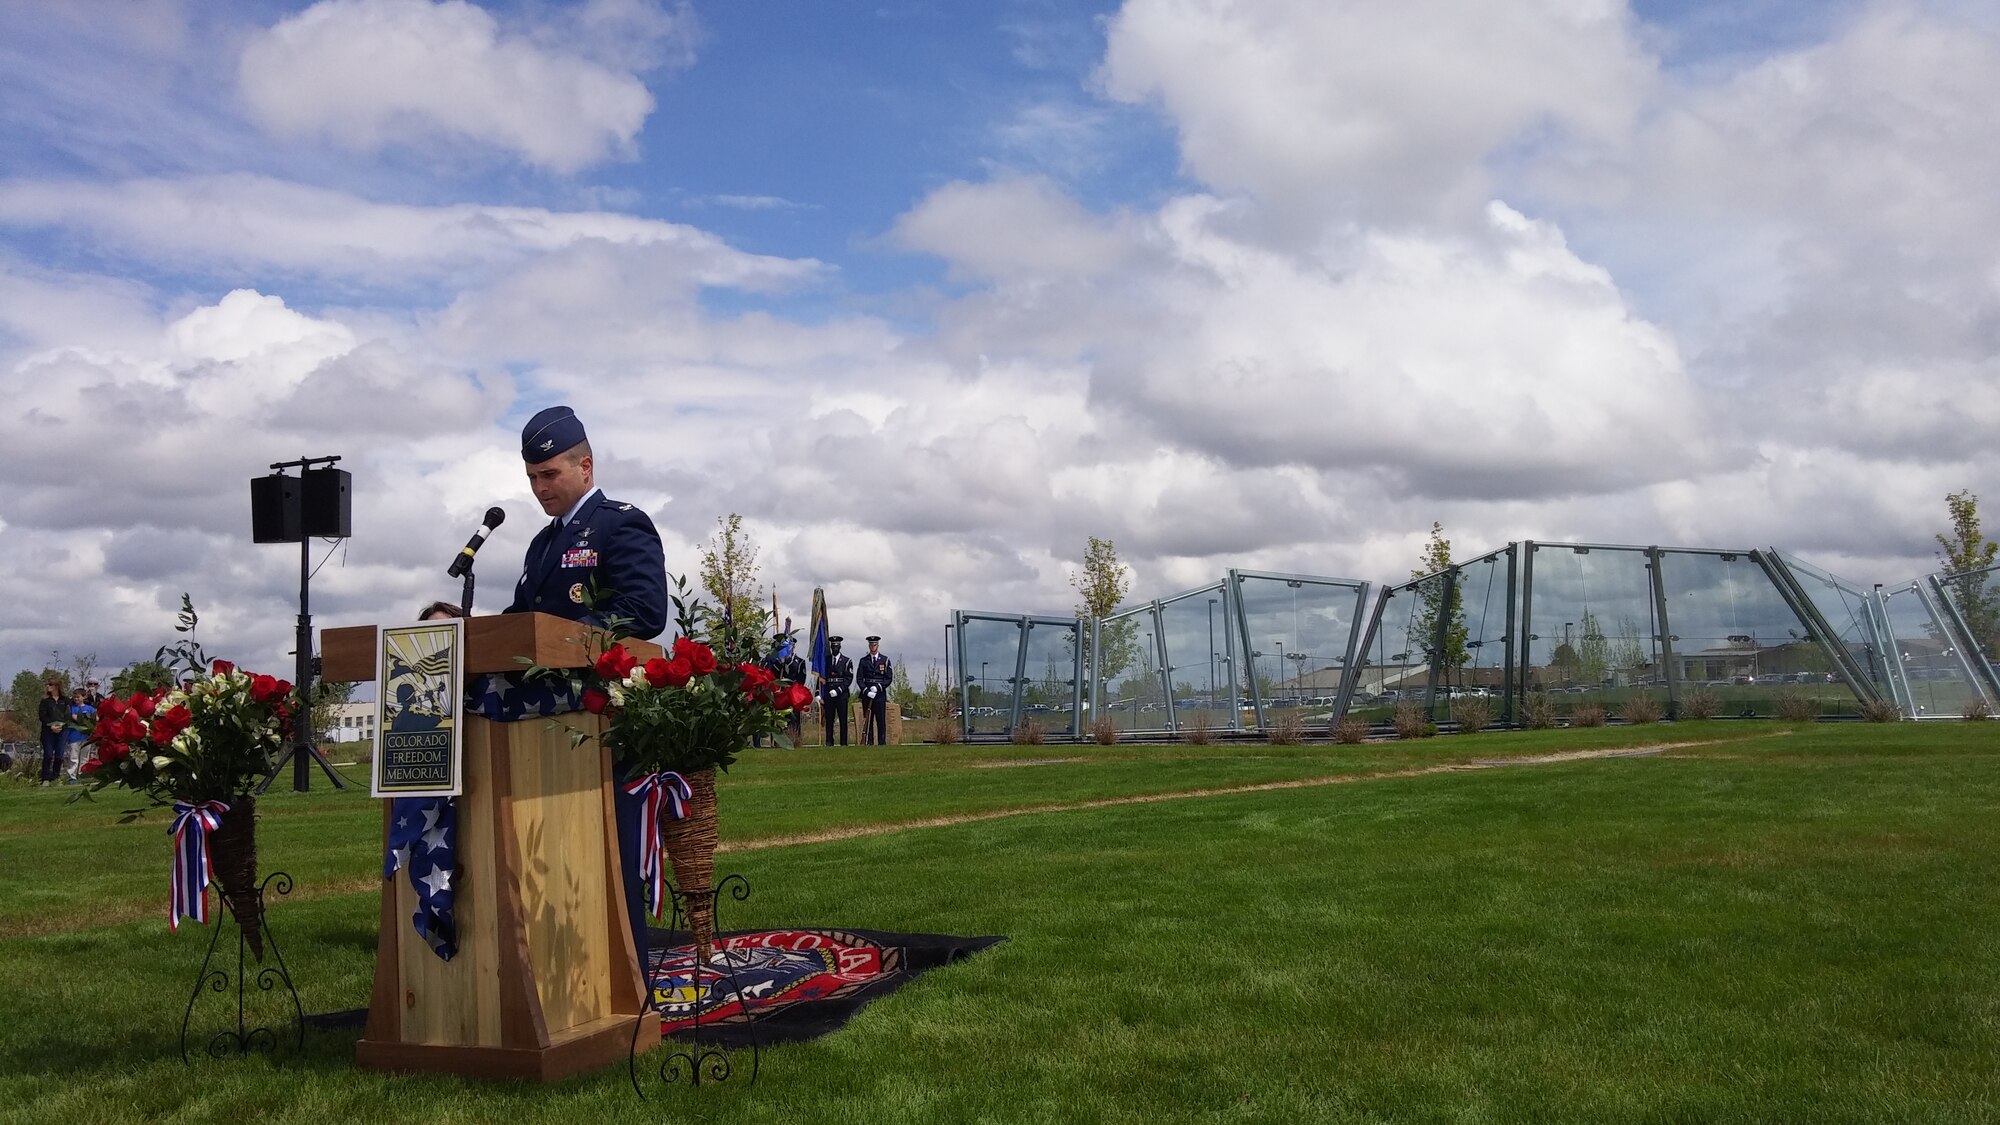 Col. John Wagner, 460th Space Wing commander, gives a speech during the Memorial Day ceremony May 23, 2015, at the Colorado Freedom Memorial in Aurora, Colorado. This year’s ceremony had multiple guest speakers, flyovers, military displays and also marked the 70th anniversary of the end of World War II. (courtesy photo)